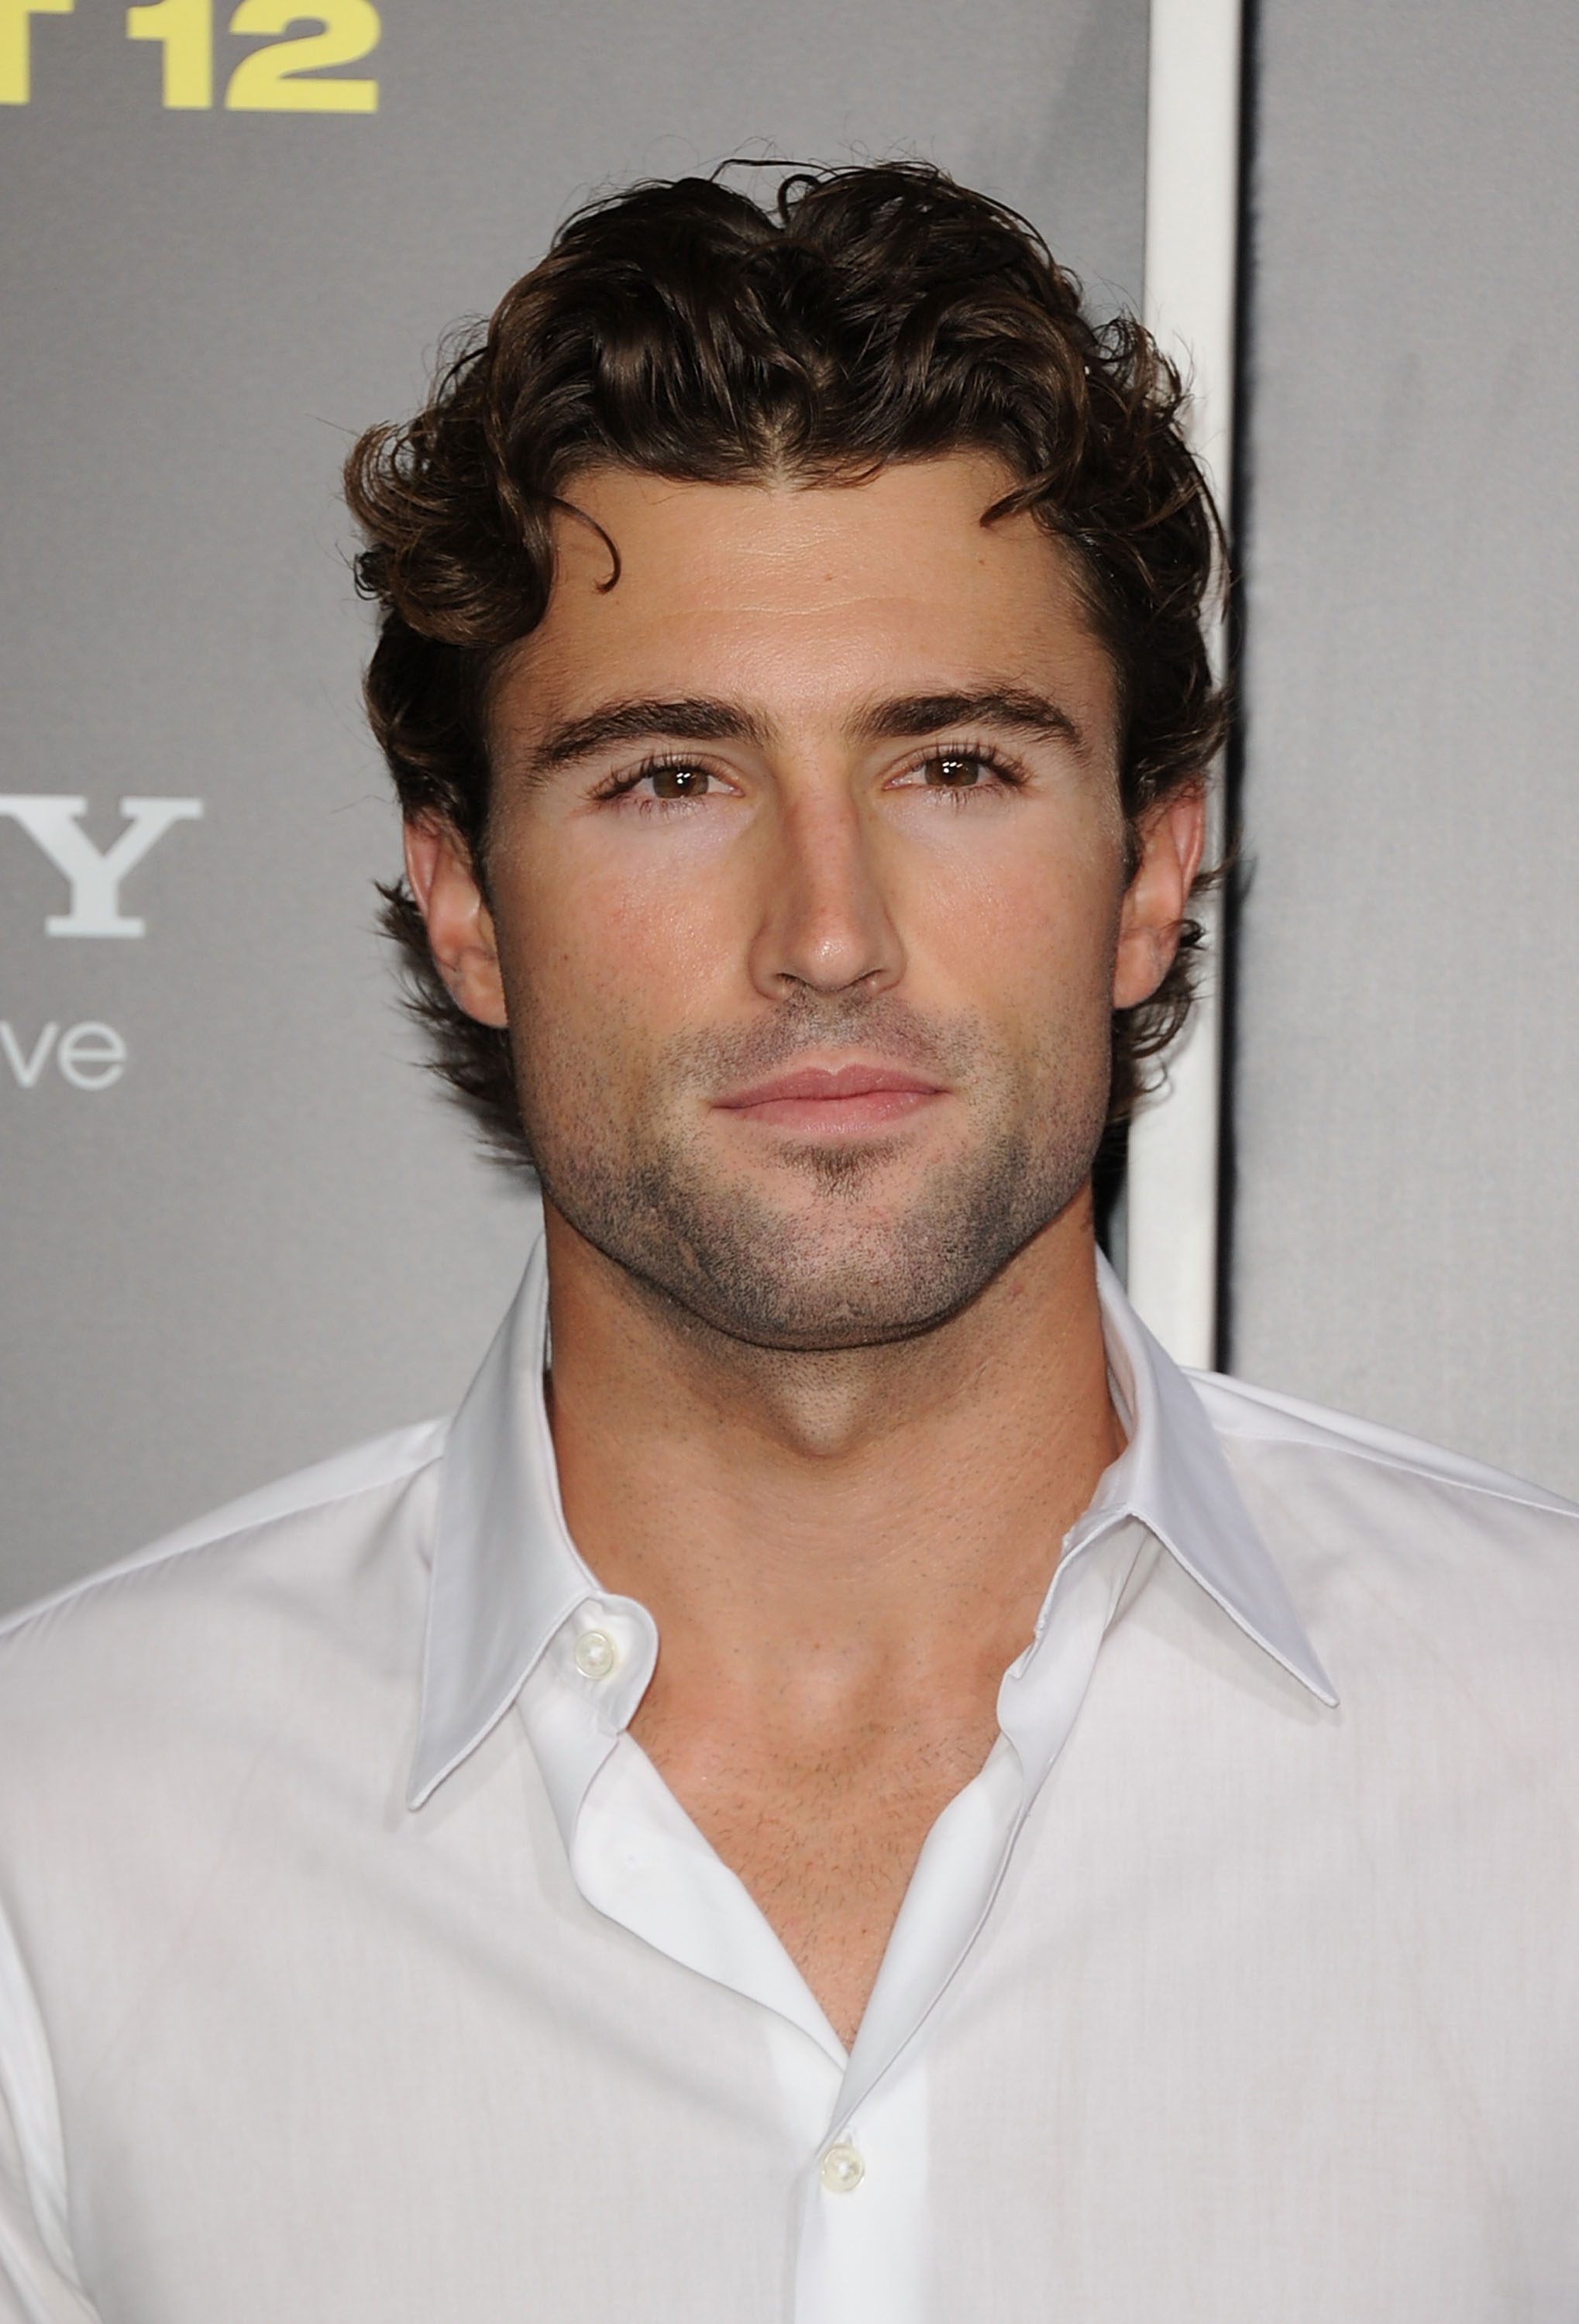 What is Brody Jenner’s Net Worth?